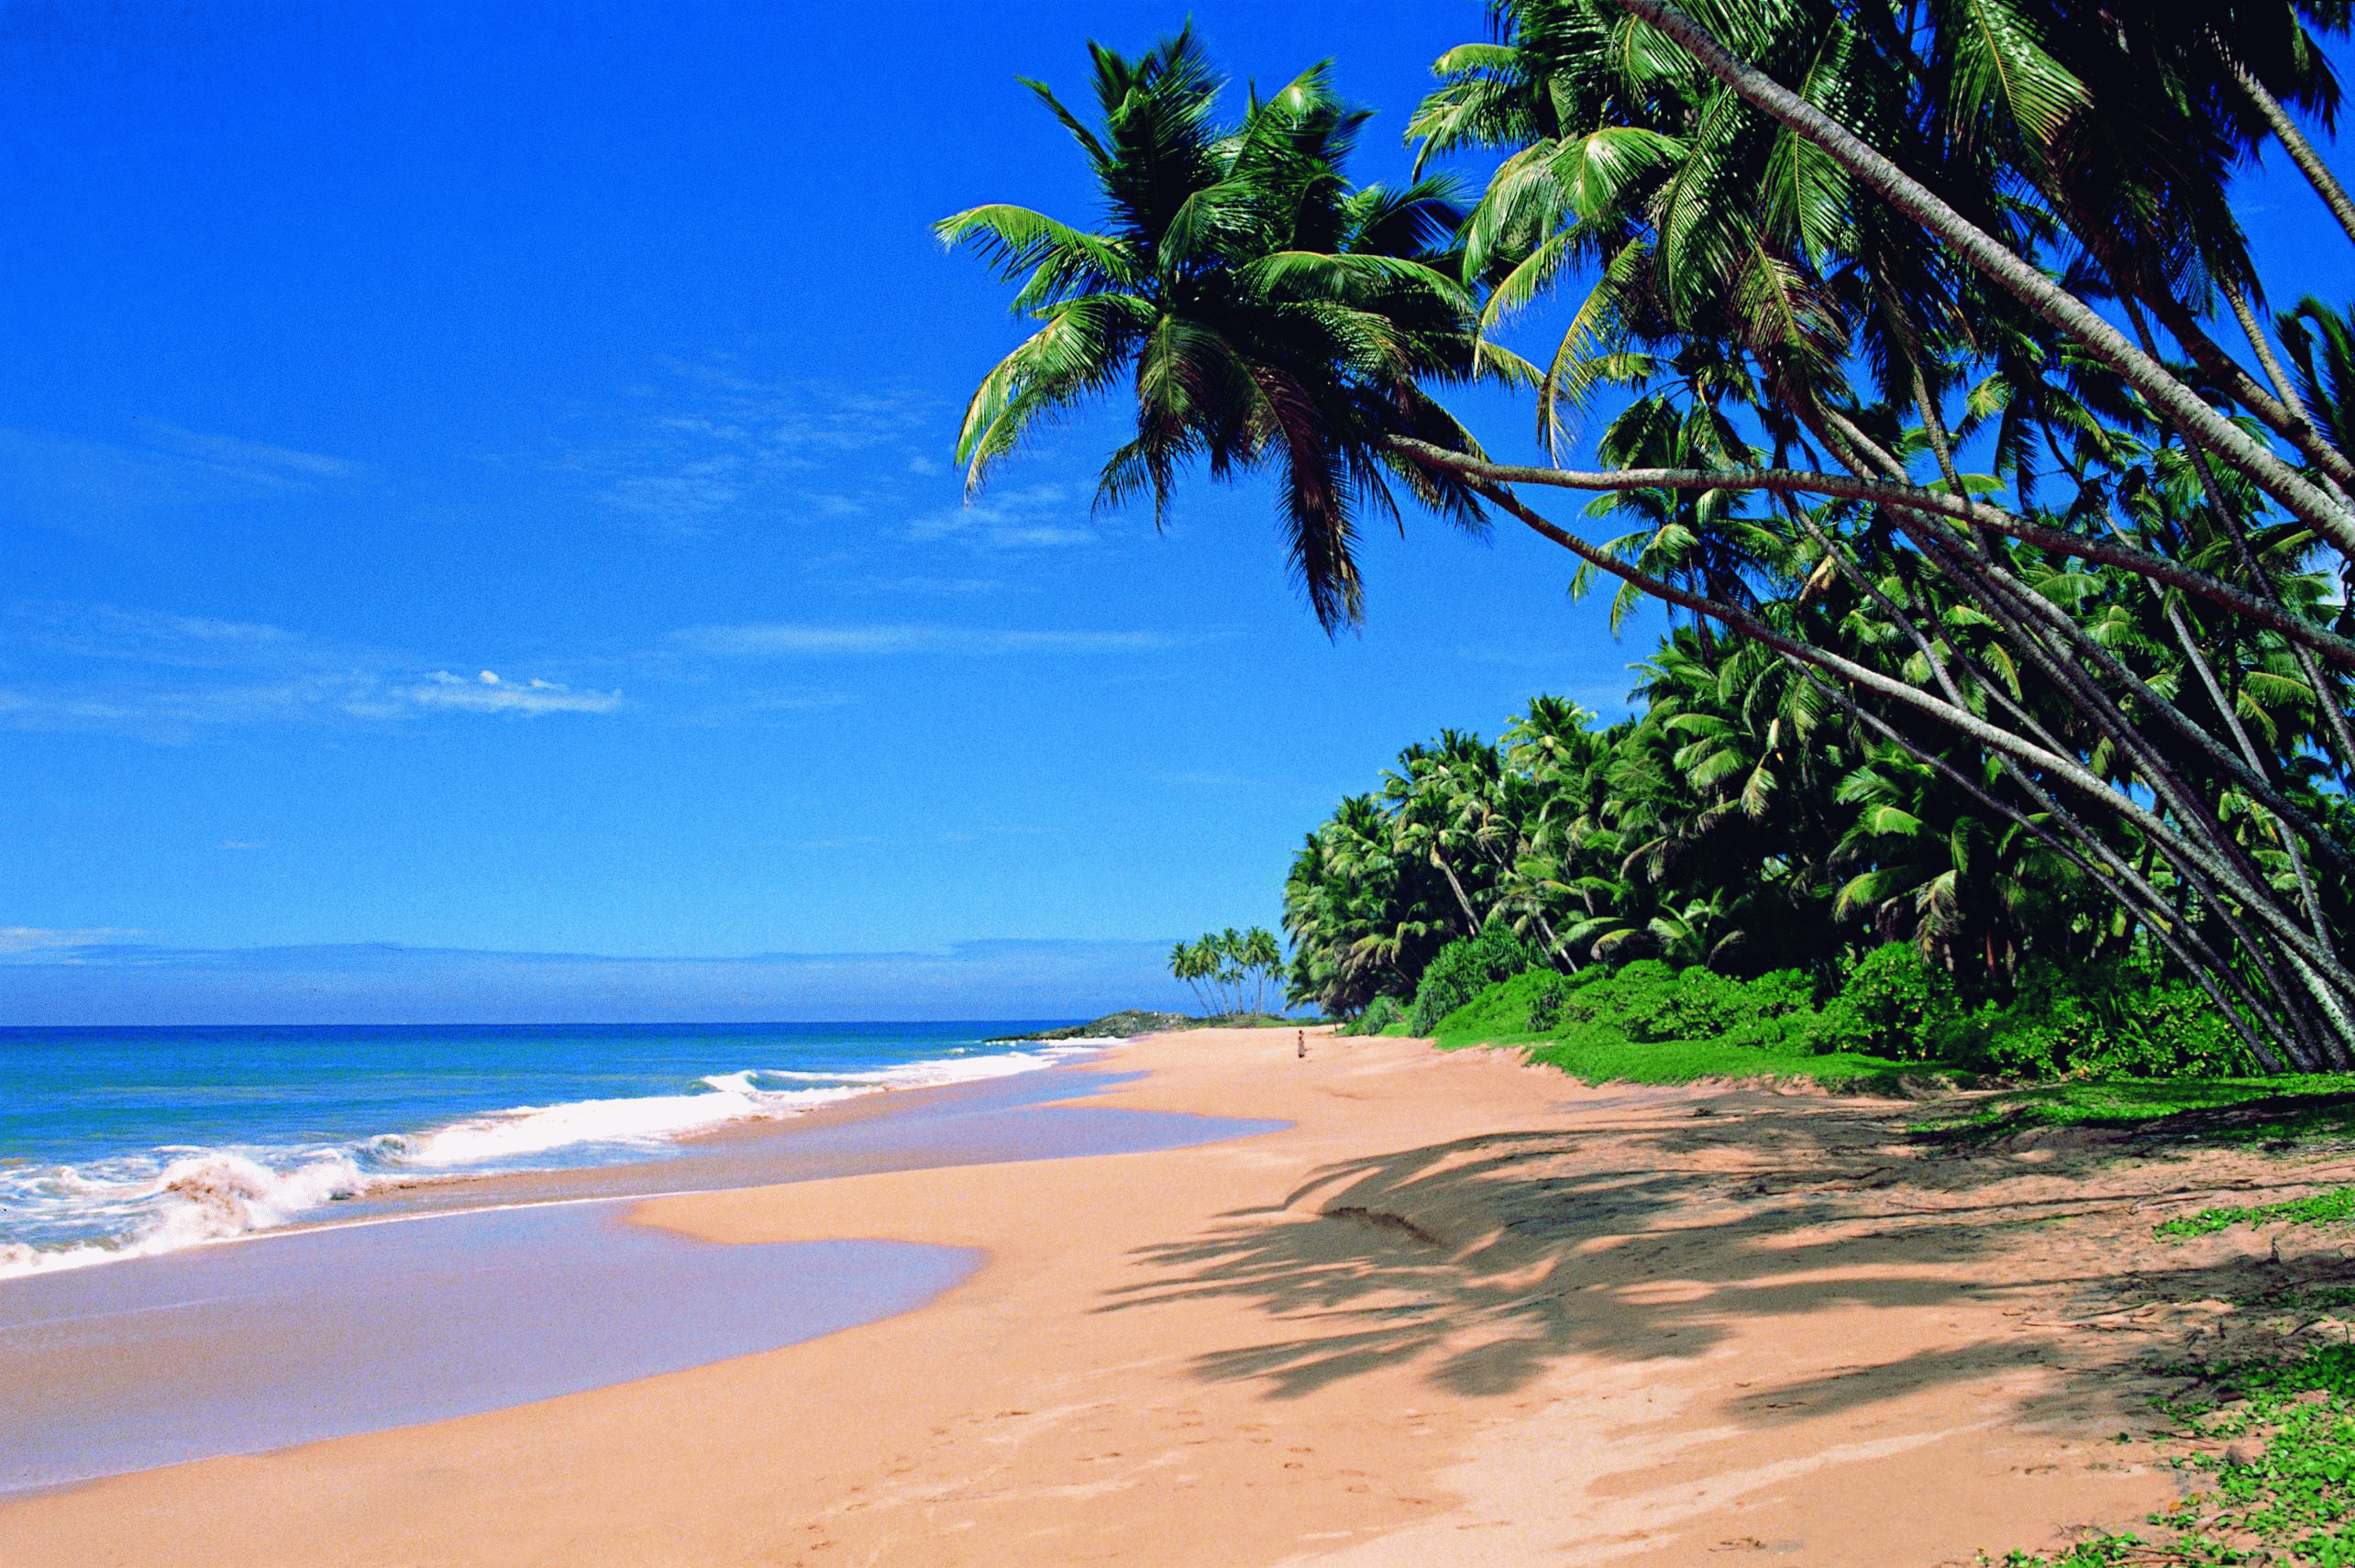 Goa Beaches Wonderful Tourists Place In India | Found The World